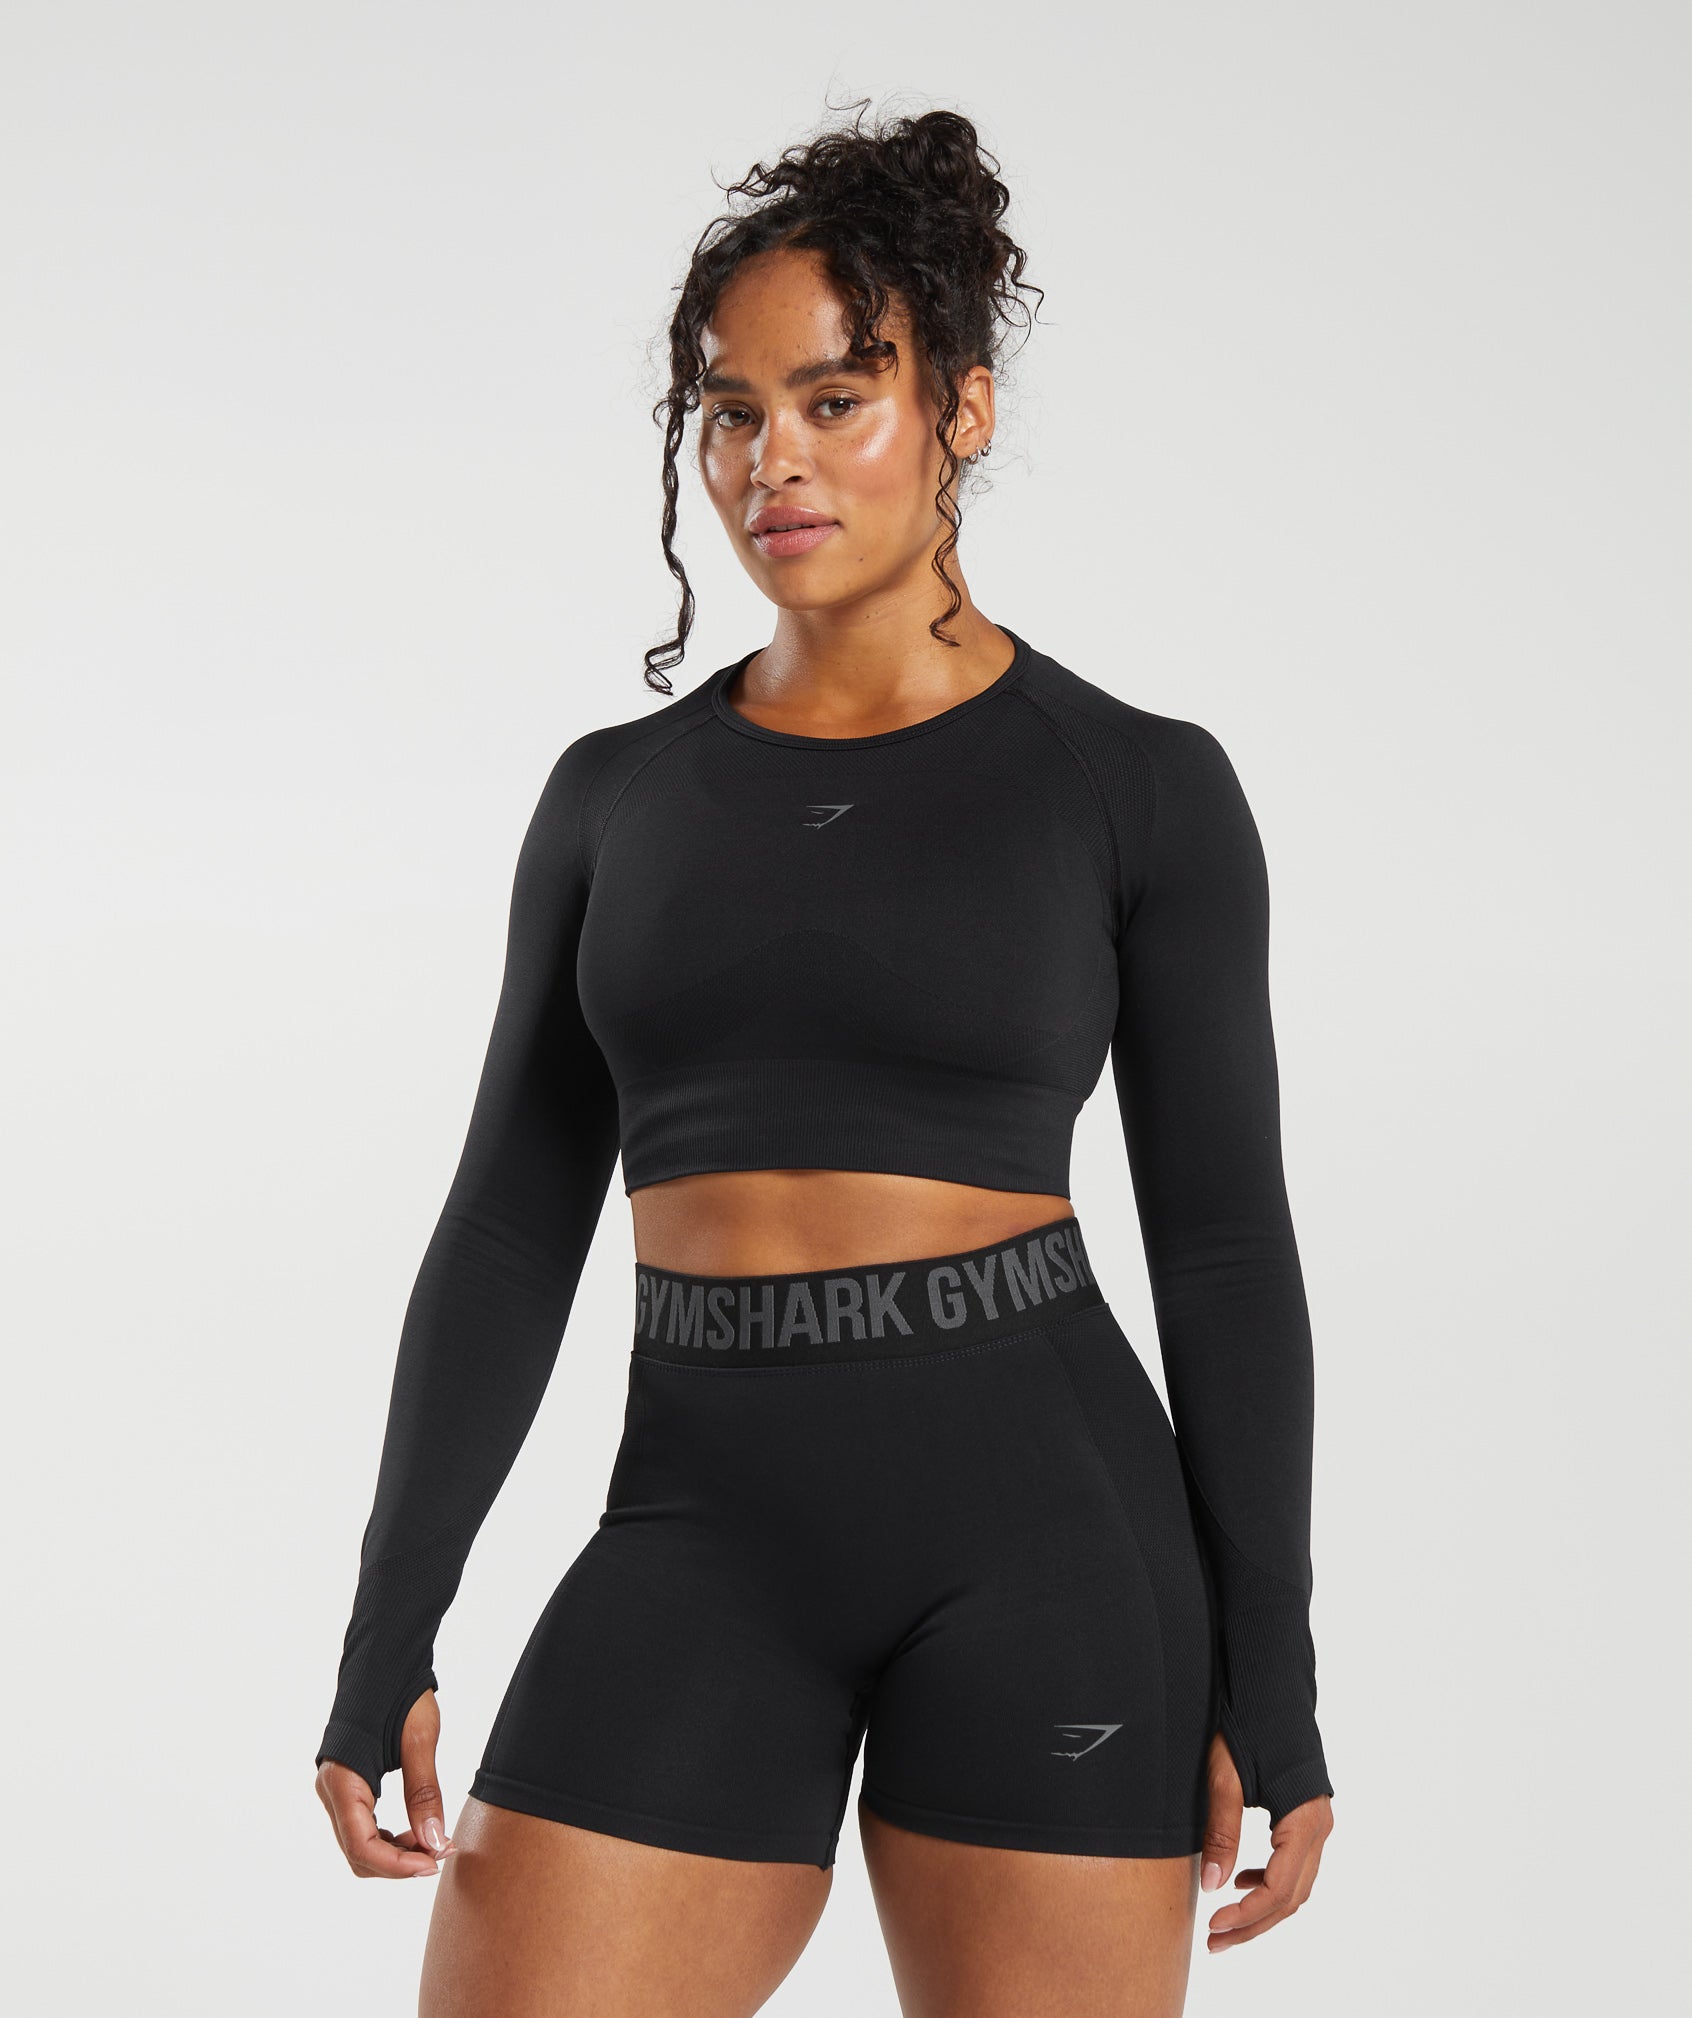 Check Seamless Washed Long Sleeve Top